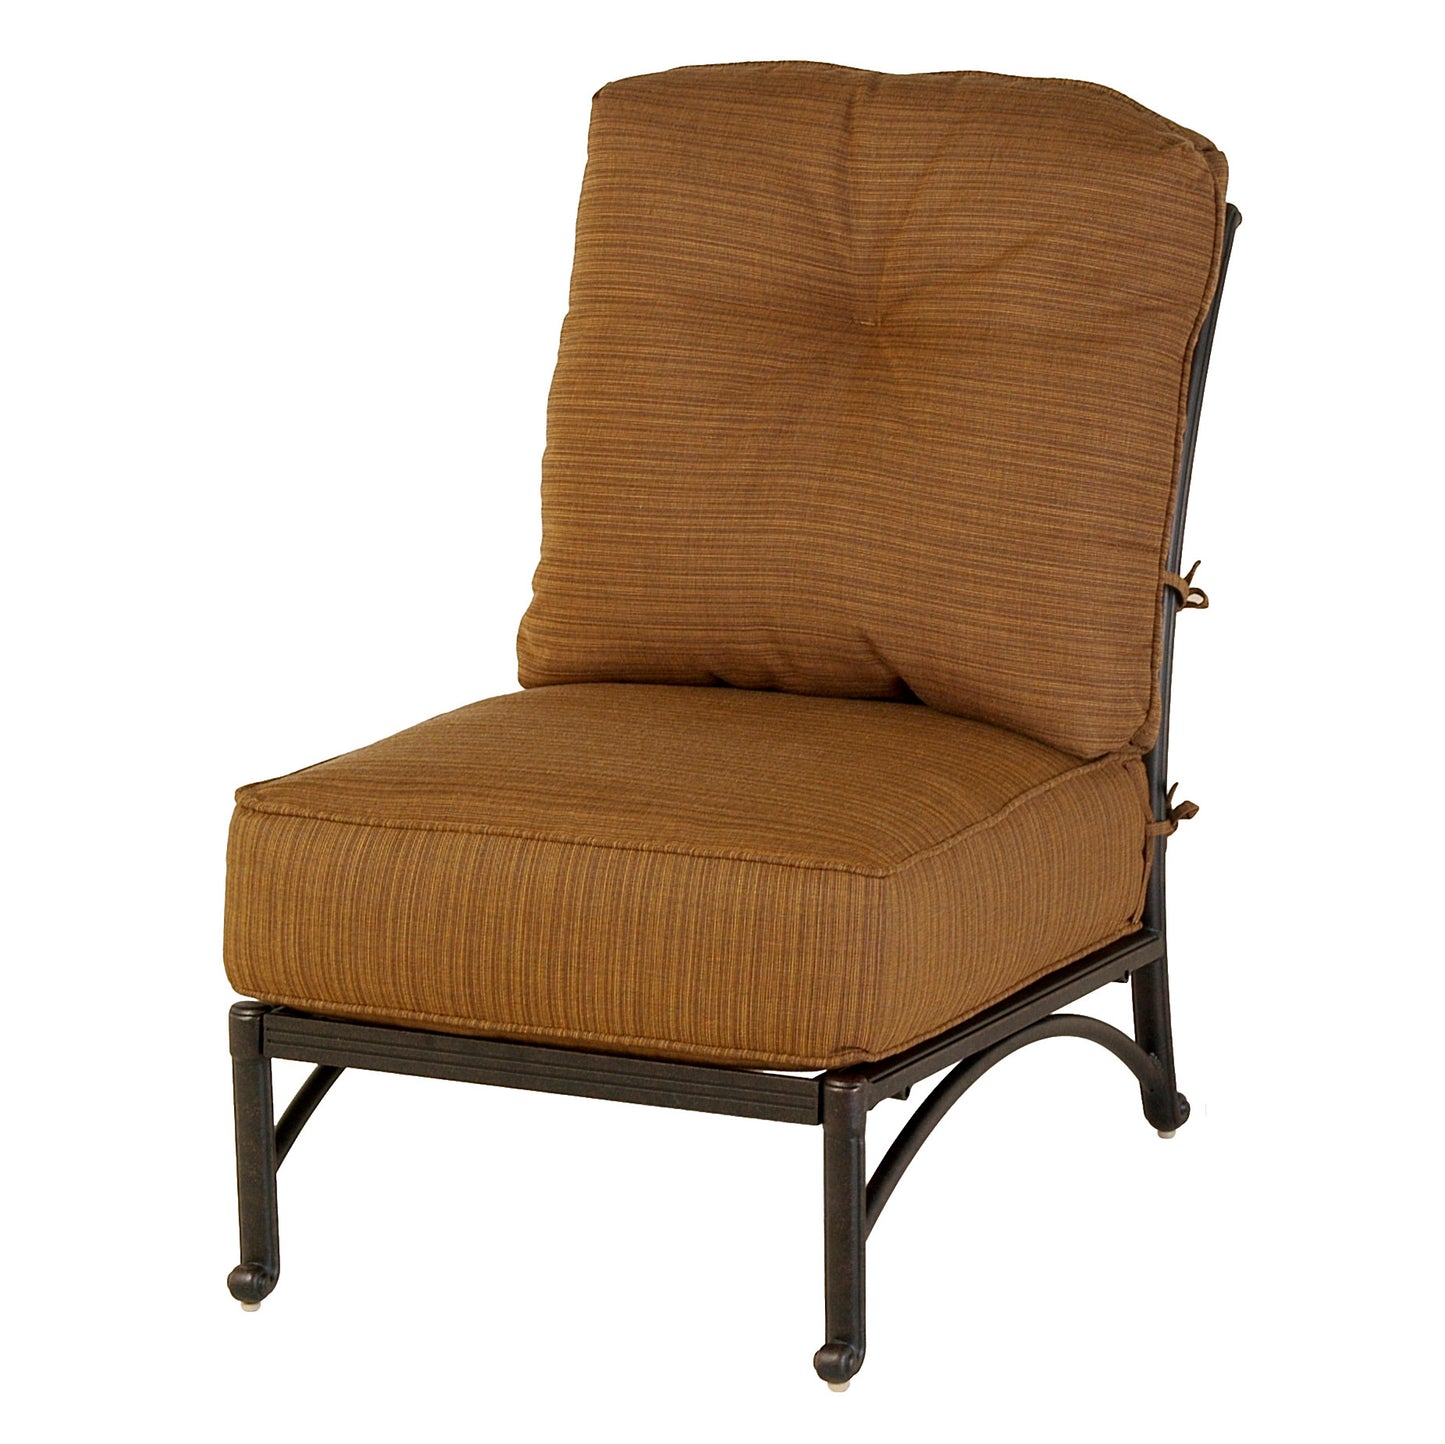 Mayfair Middle Sectional Club Chair